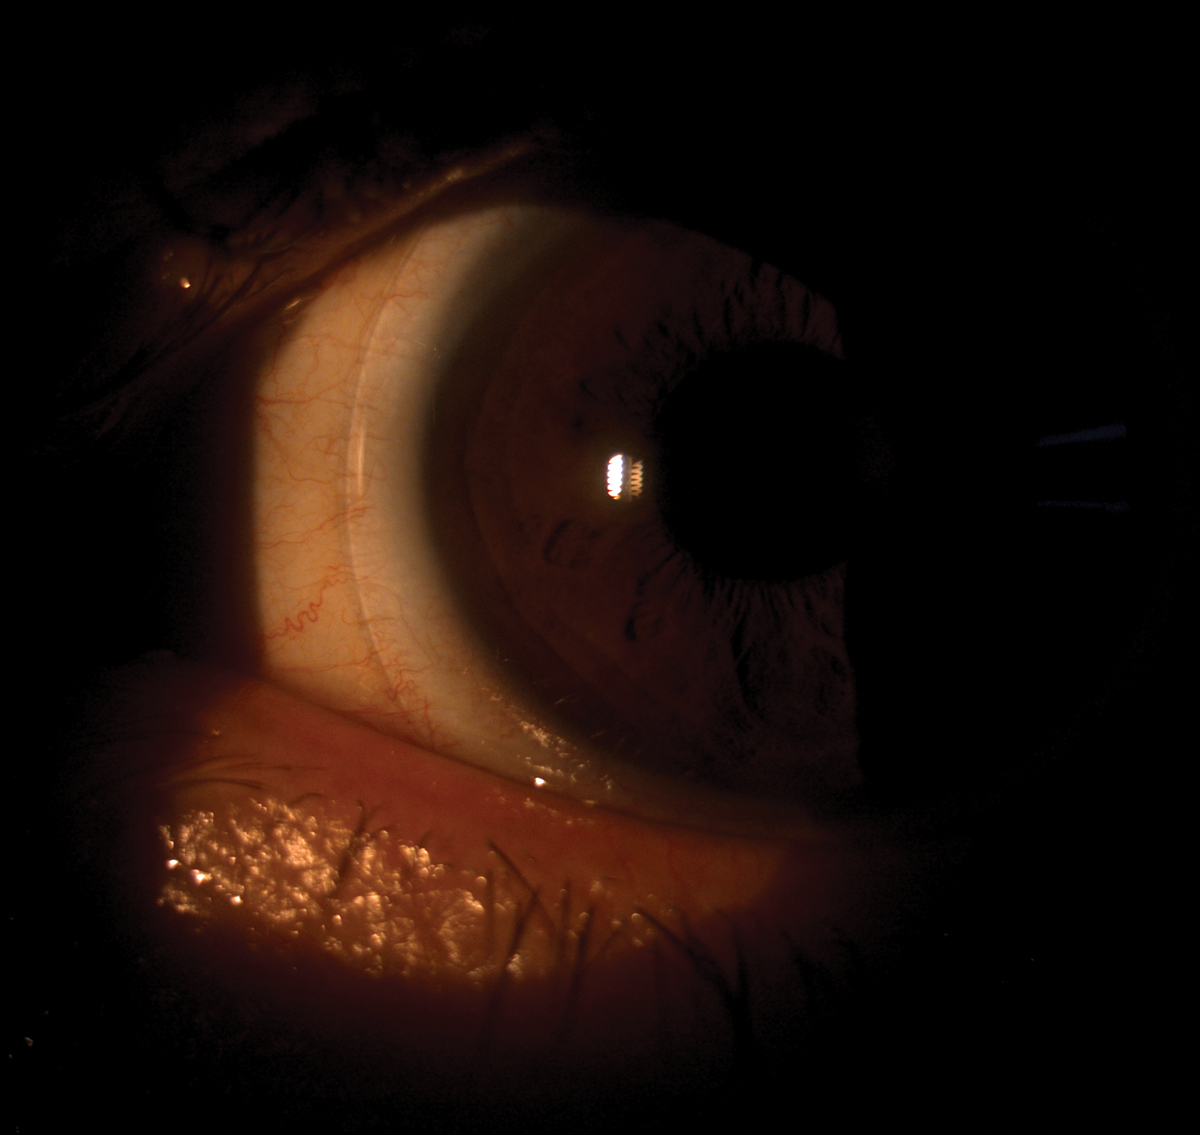 This post-LASIK patient was successfully fit with a scleral lens.